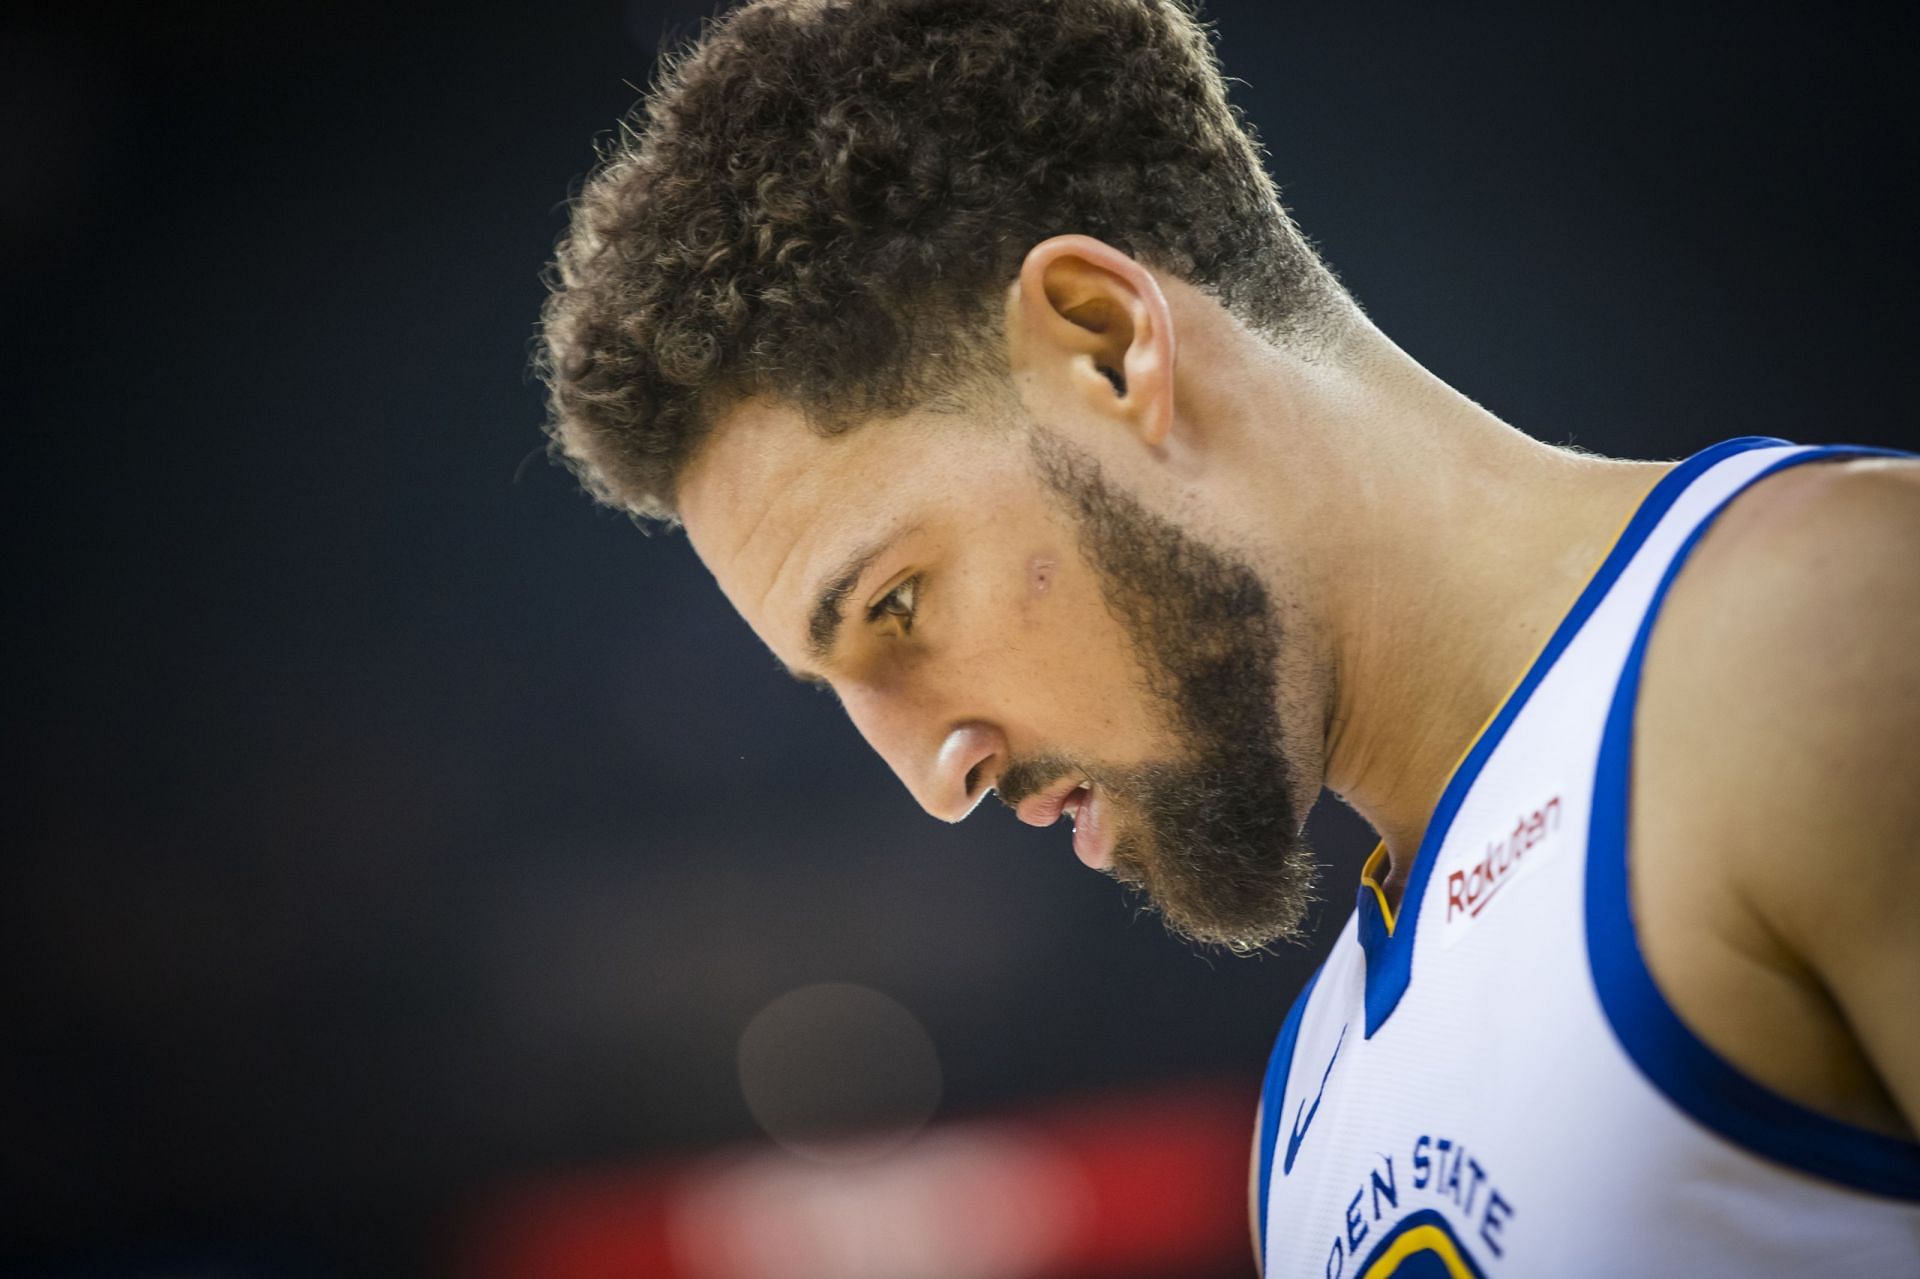 Golden State Warriors Klay Thompson continues to work his way back to the team